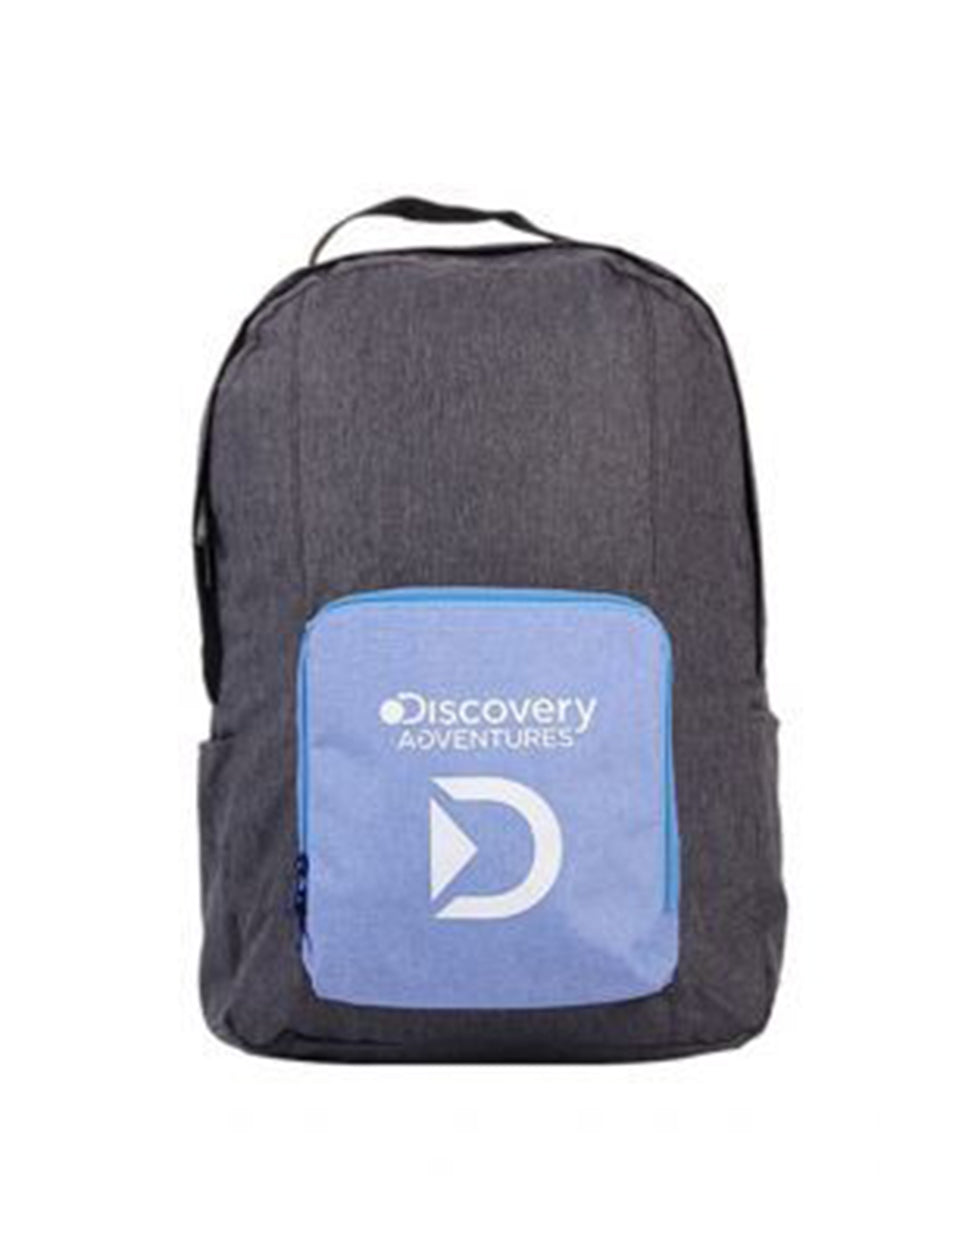 Discovery Adventure Foldable Adventureble Storage Carry Bag Grey Dhf74736